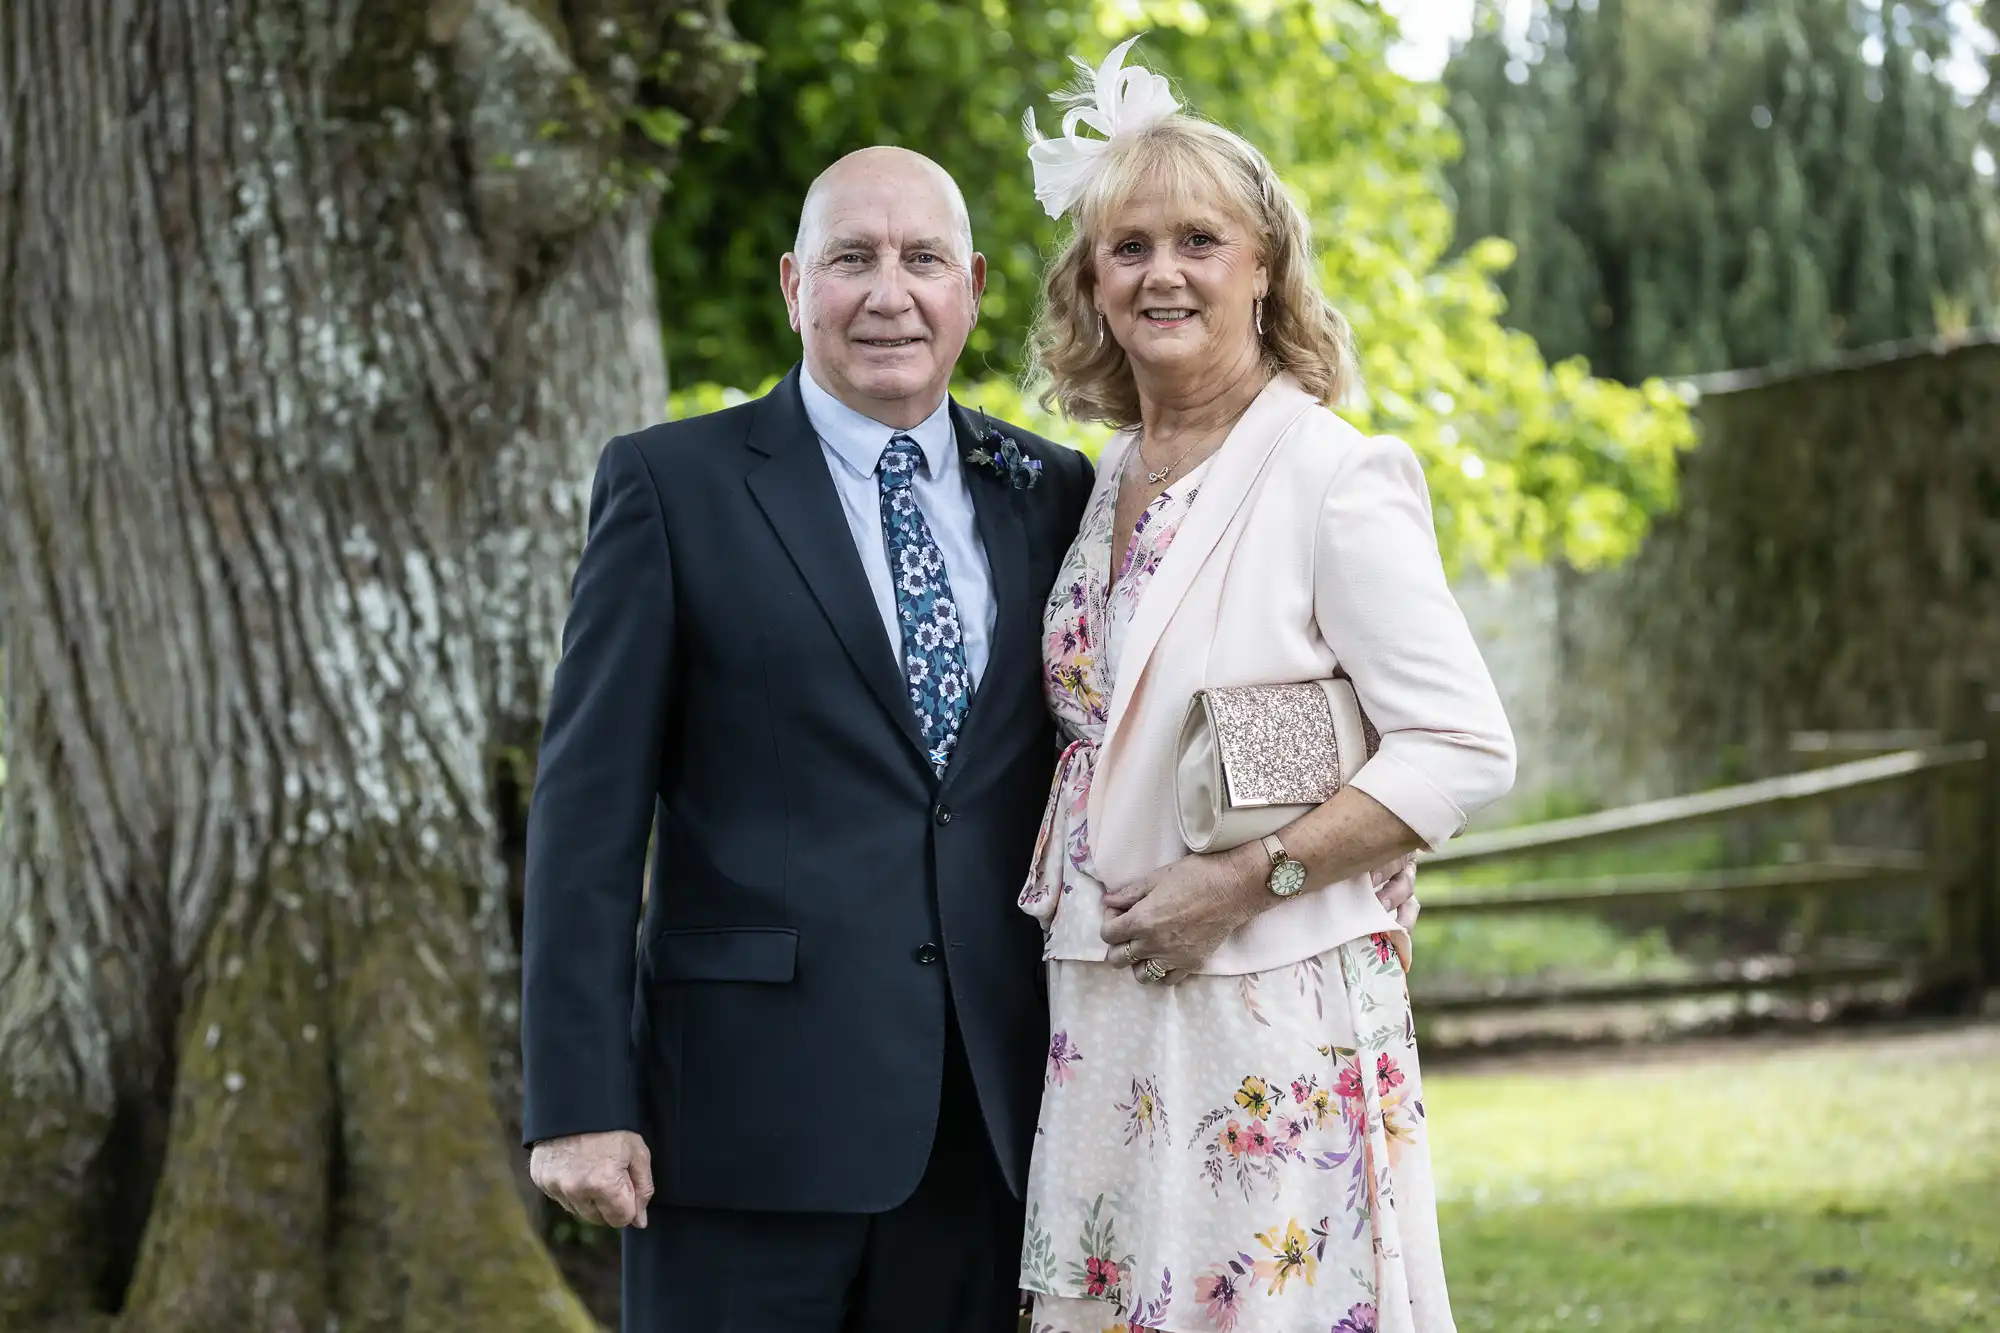 A mature couple dressed in formal wear, the man in a dark suit and the woman in a pink floral dress, posing together outdoors by a large tree.